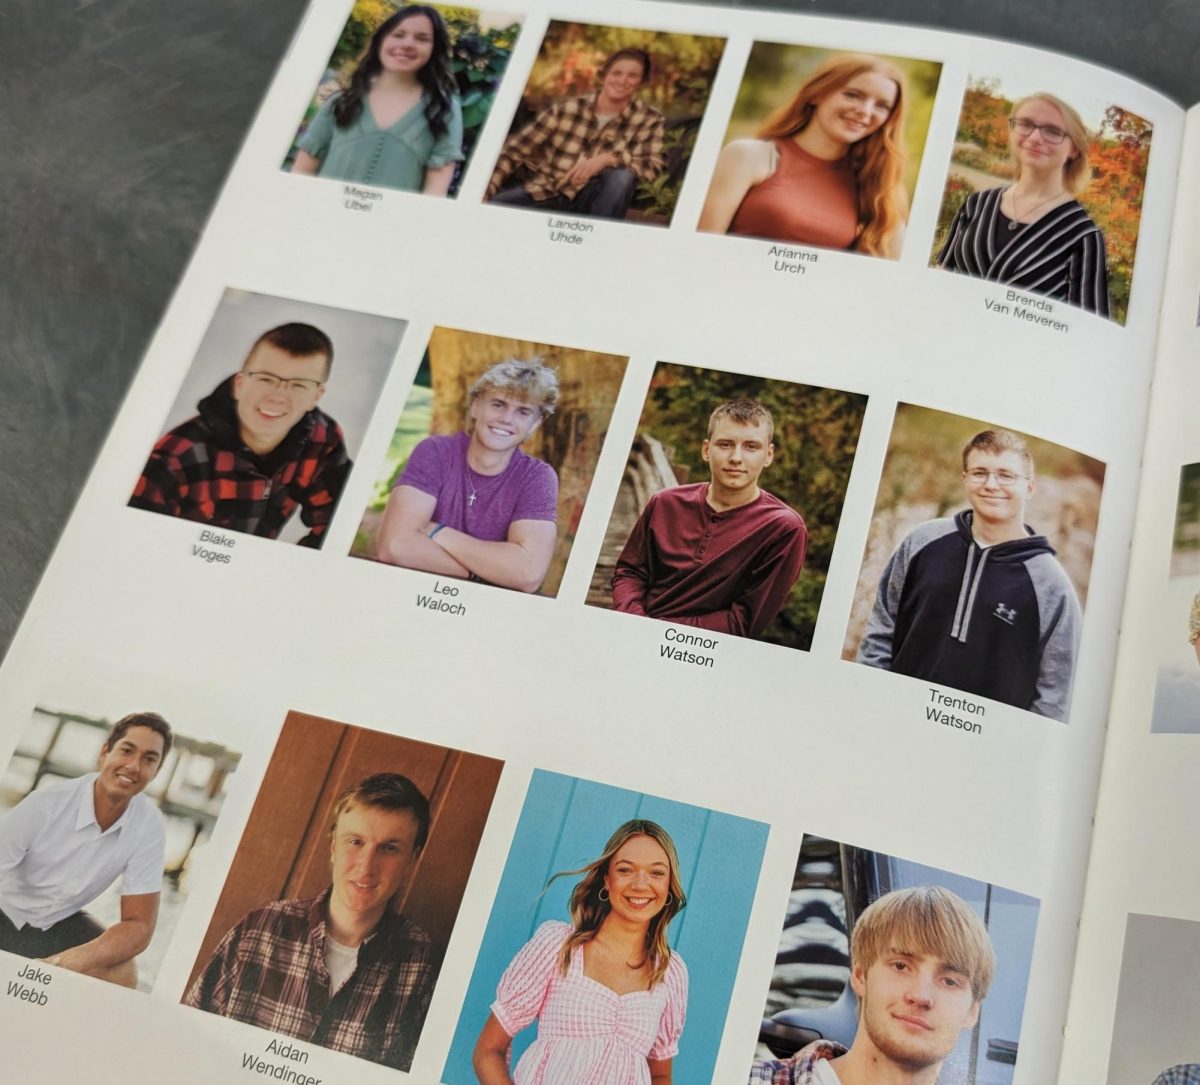 A page of Seniors in the NUHS 2022-2023 Yearbook, featuring many Seniors and their names.